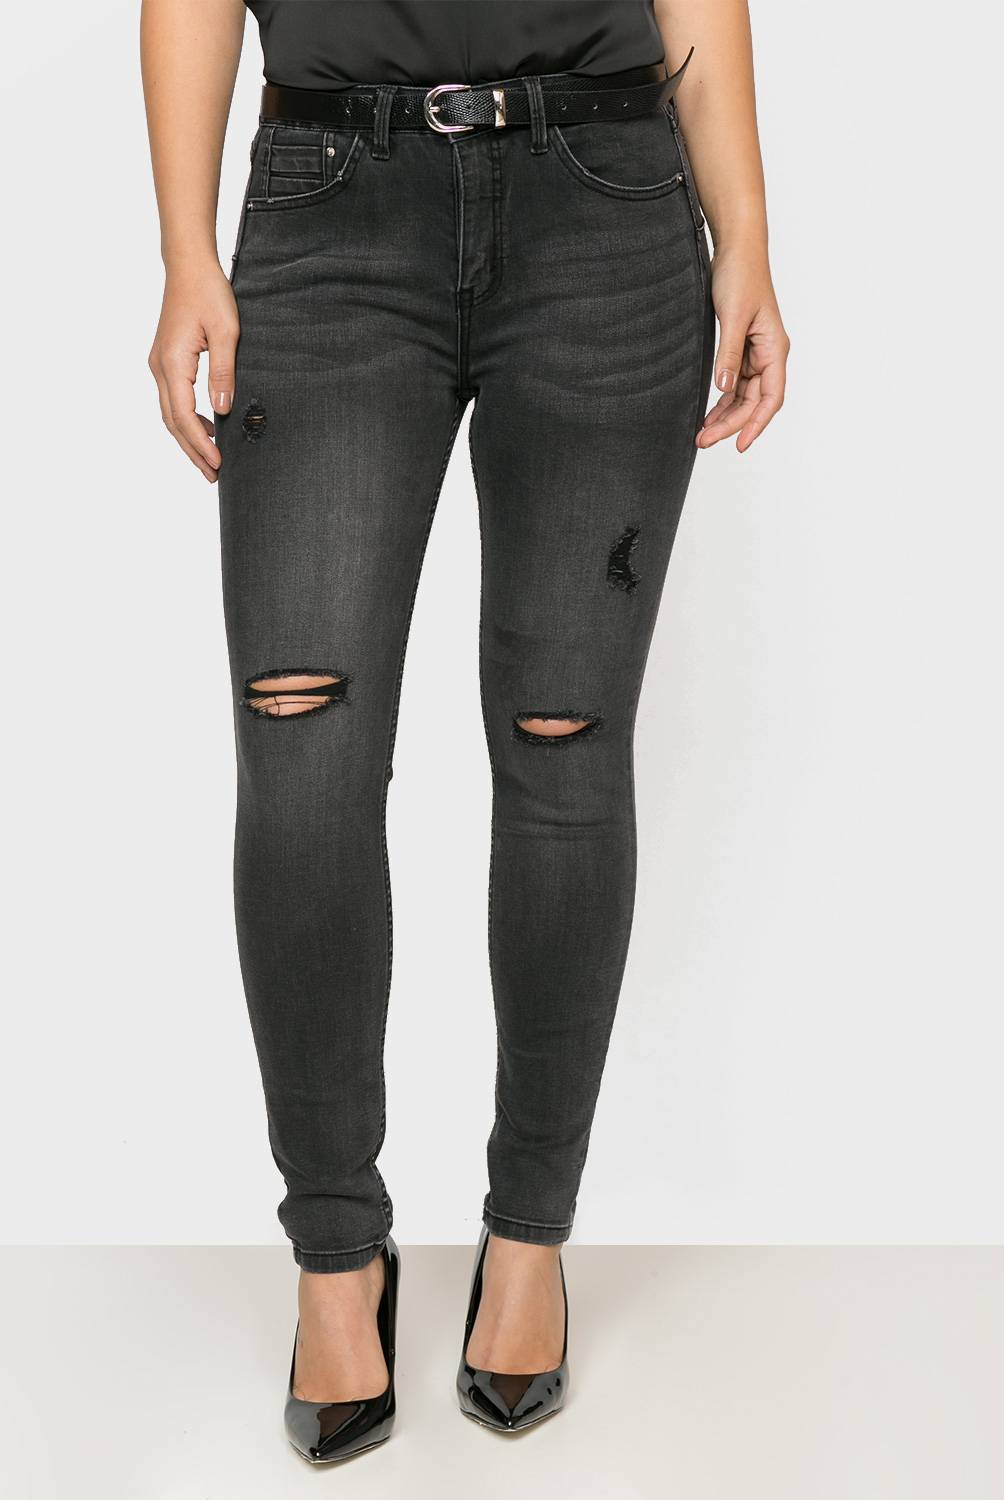 MOSSIMO - Jeans Skinny Mujer